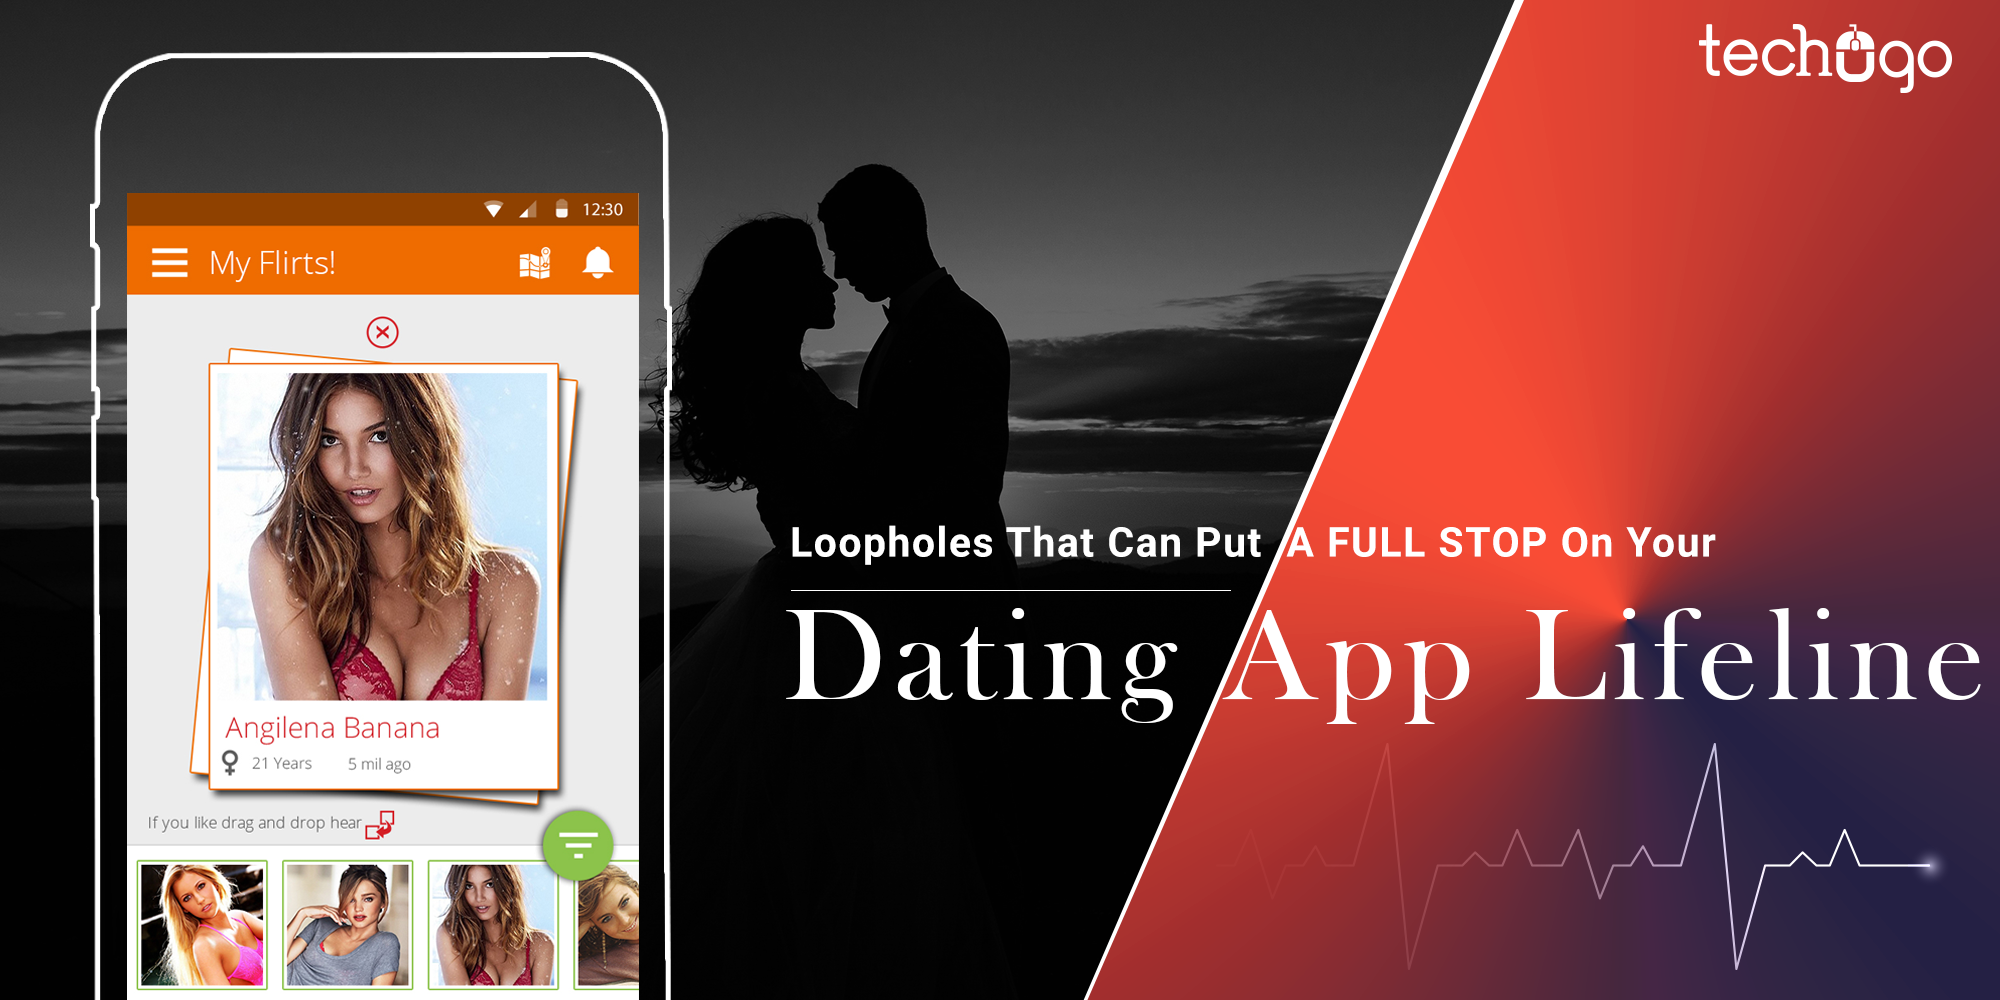 Loopholes That Can Put A FULL STOP On Your Dating App Lifeline